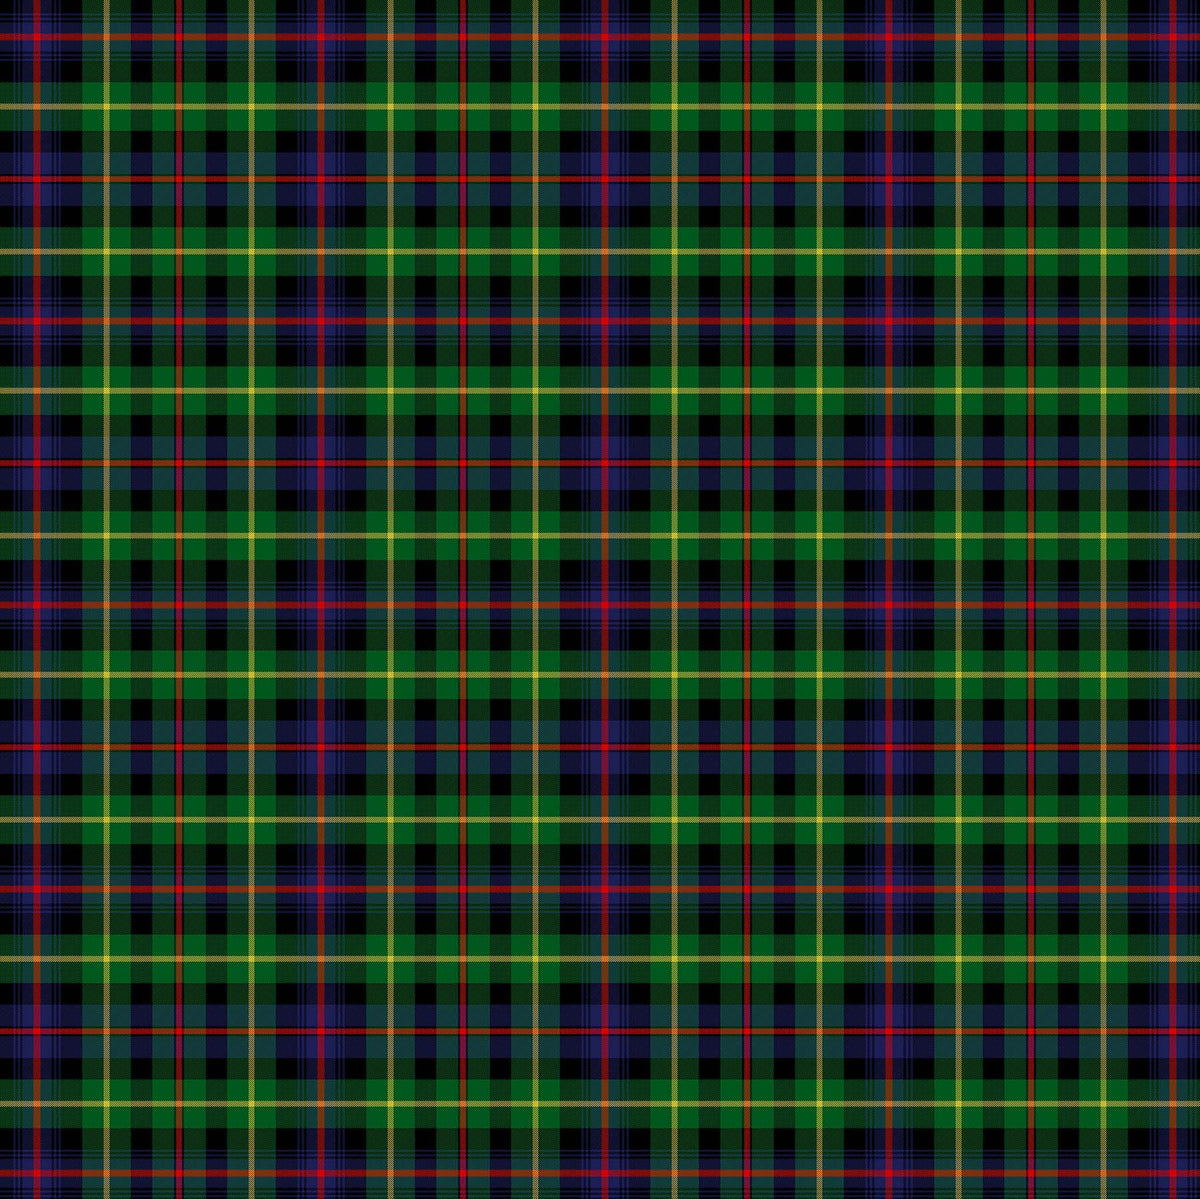 Totally Tartans Brushed Cotton Quilt Fabric - Farquharson in Green/Multi - W24507-76